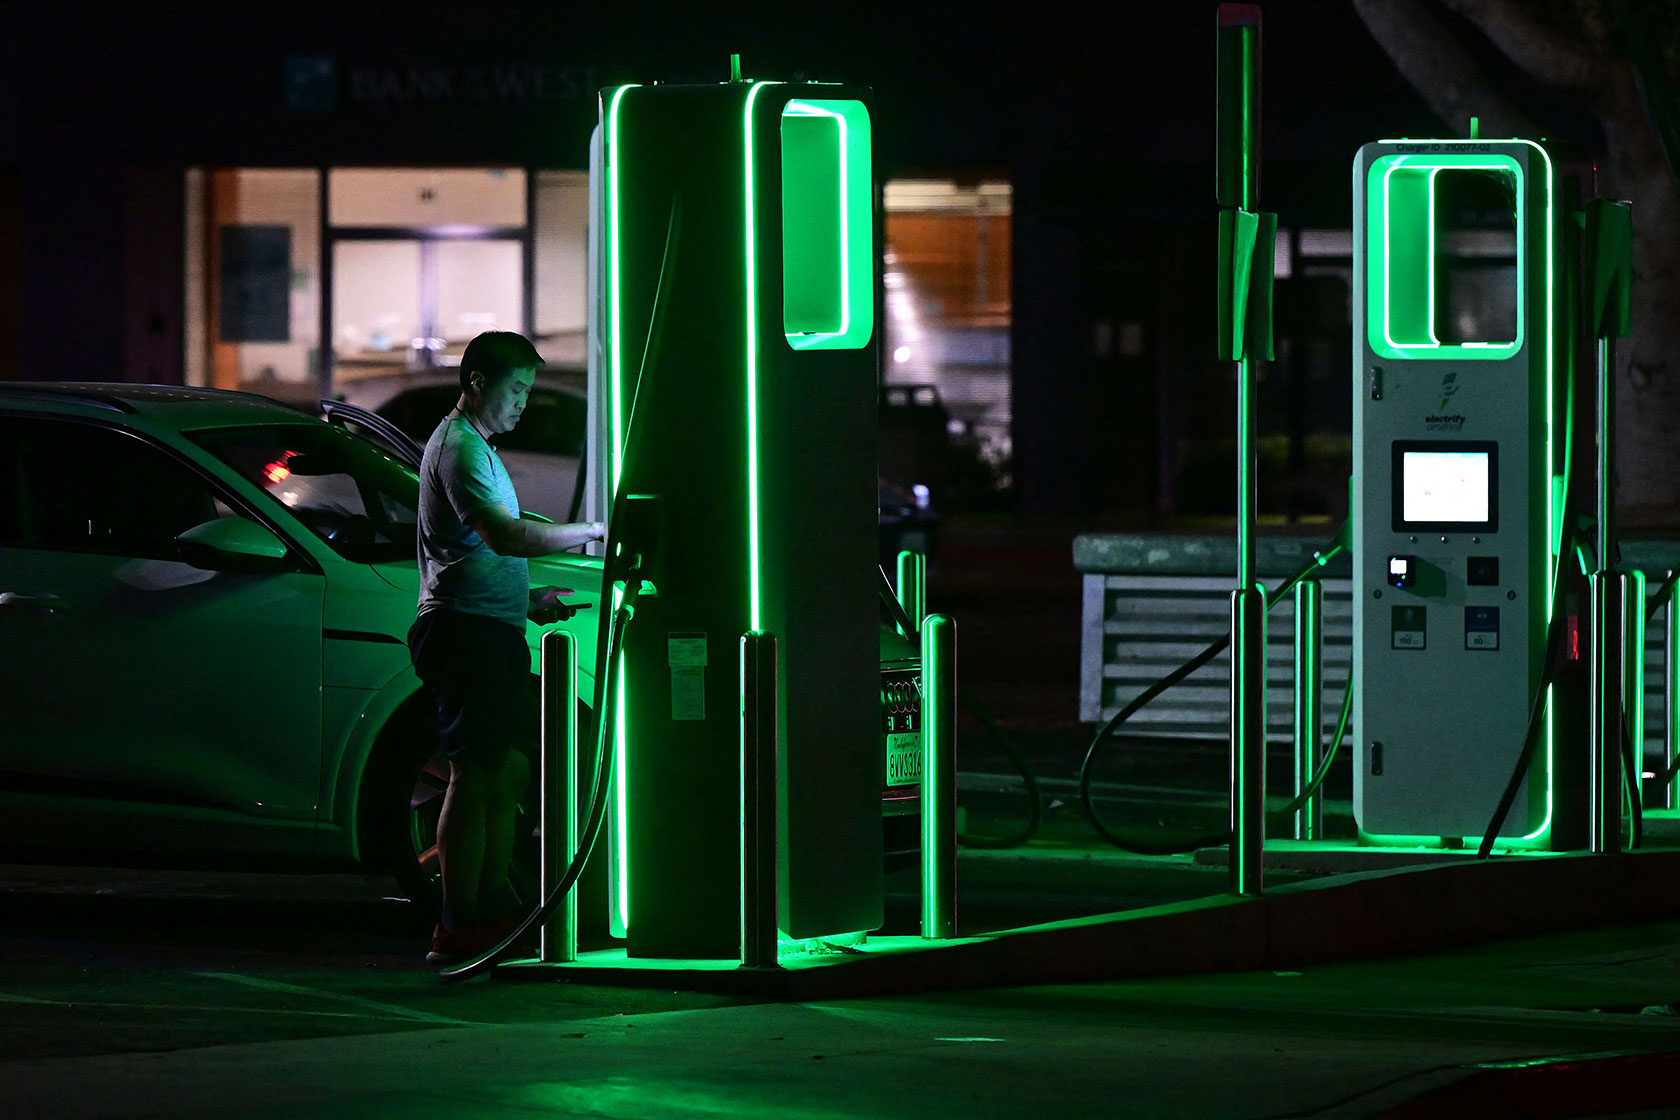 Photo shows a man plugging his car into a EV charger that glows green in the night